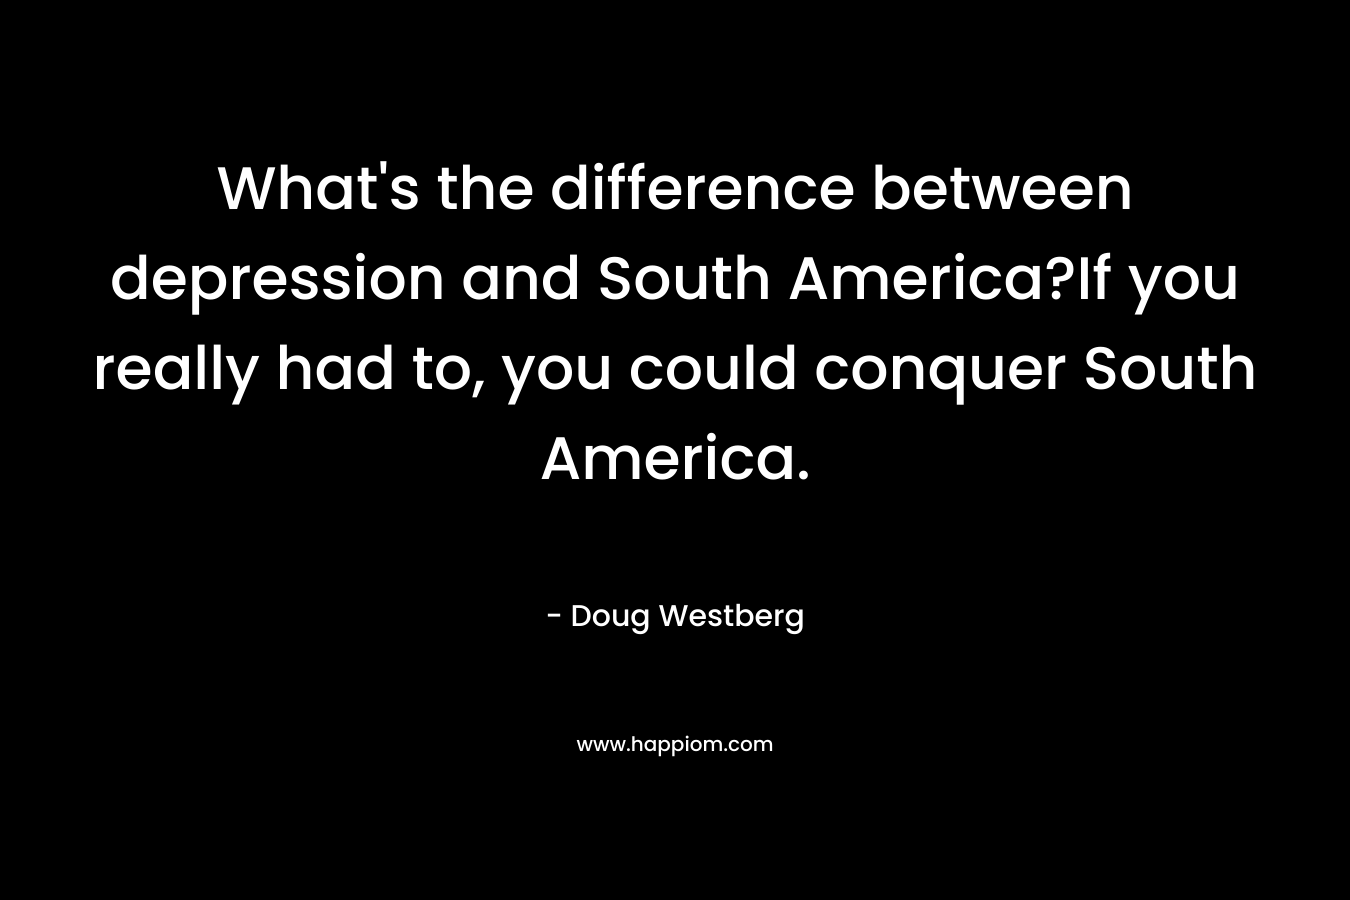 What's the difference between depression and South America?If you really had to, you could conquer South America.